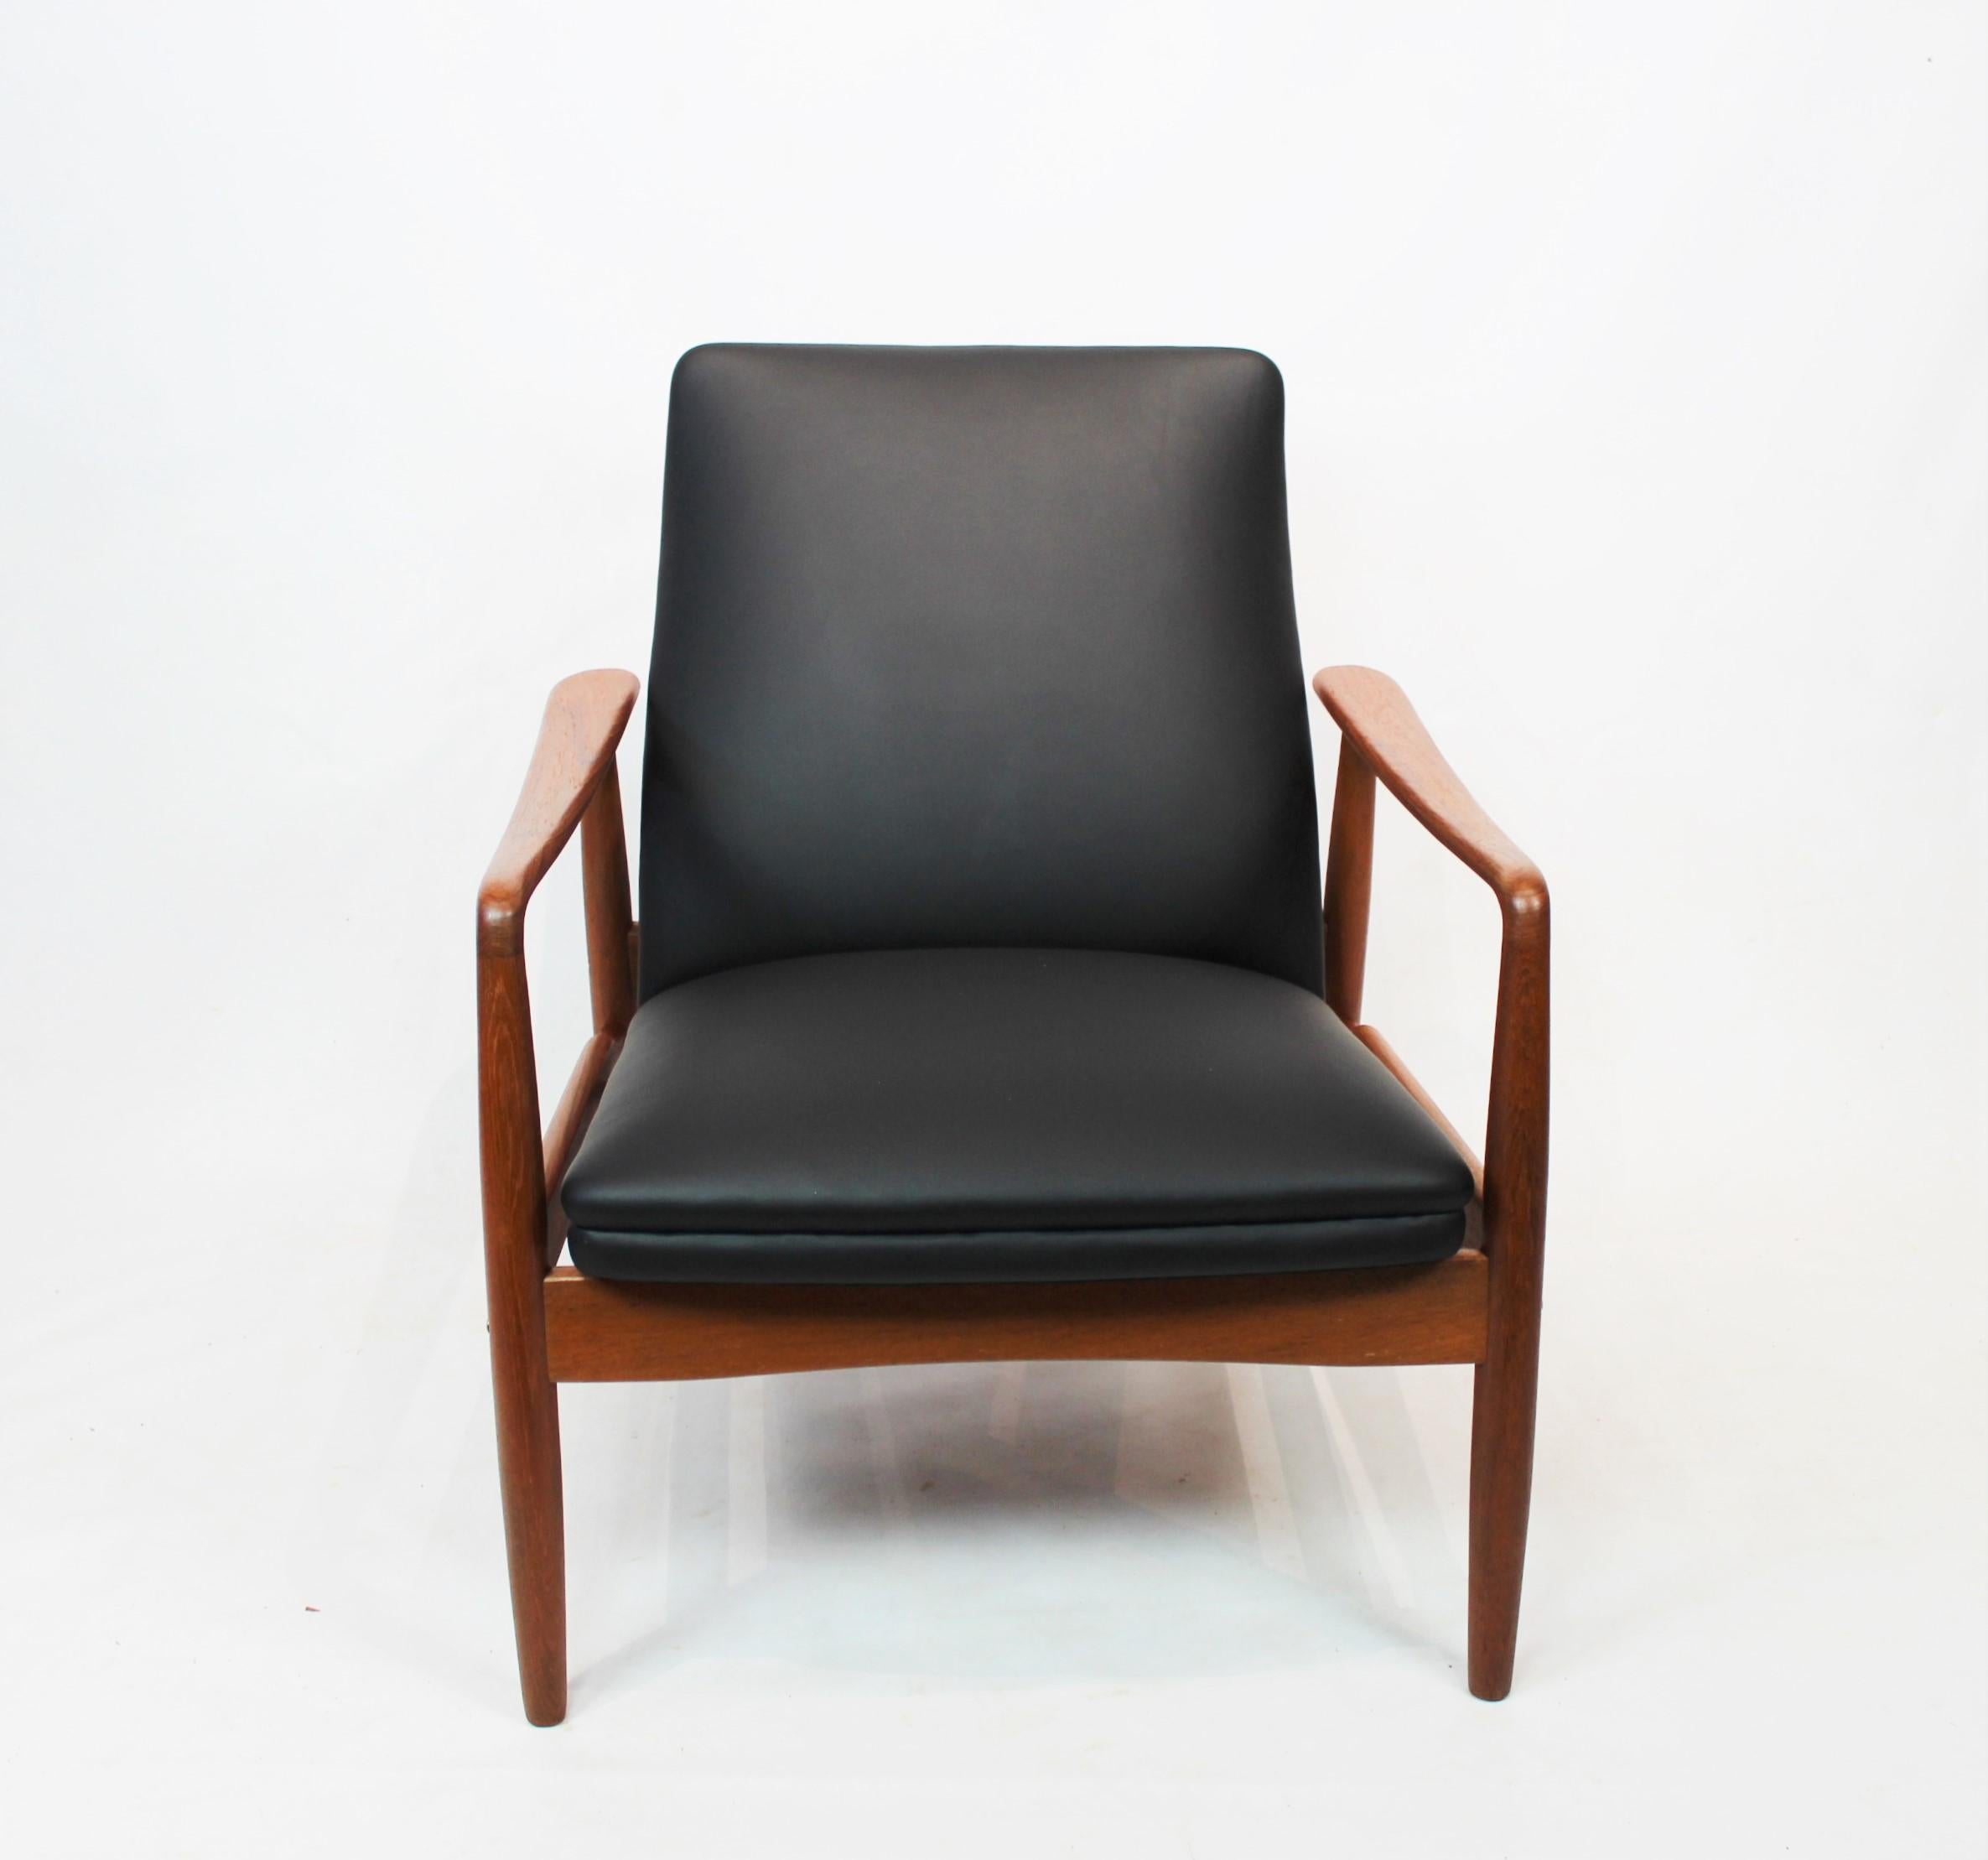 Easy chair in teak and black leather designed by Søren Ladefoged in the 1960s. The chair is in great vintage condition.
Measures: H 72 cm, W - 72 cm, W - 69 cm and D - 40 cm.